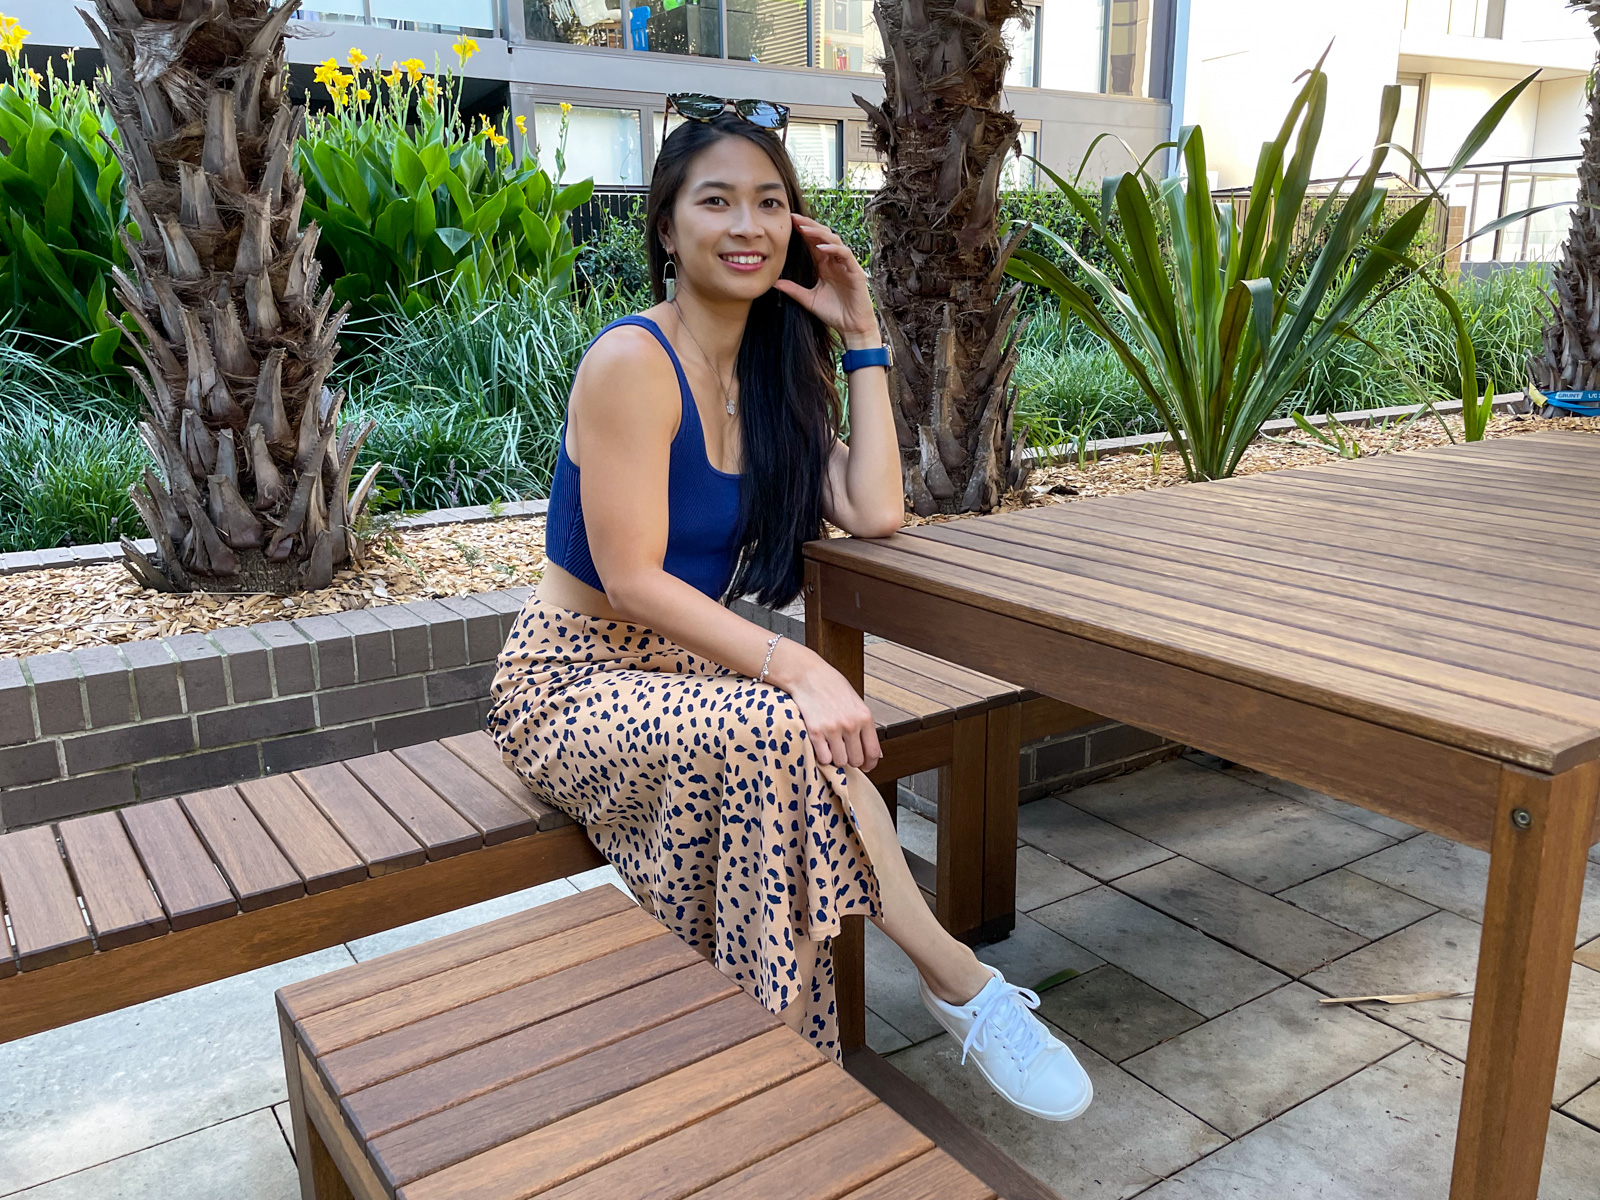 An Asian woman with long dark hair, wearing a long tan coloured midi skirt with a dark animal print, and a fitted blue top. She is sitting on a wooden bench alongside a wooden table and is leaning on the table with her elbow.